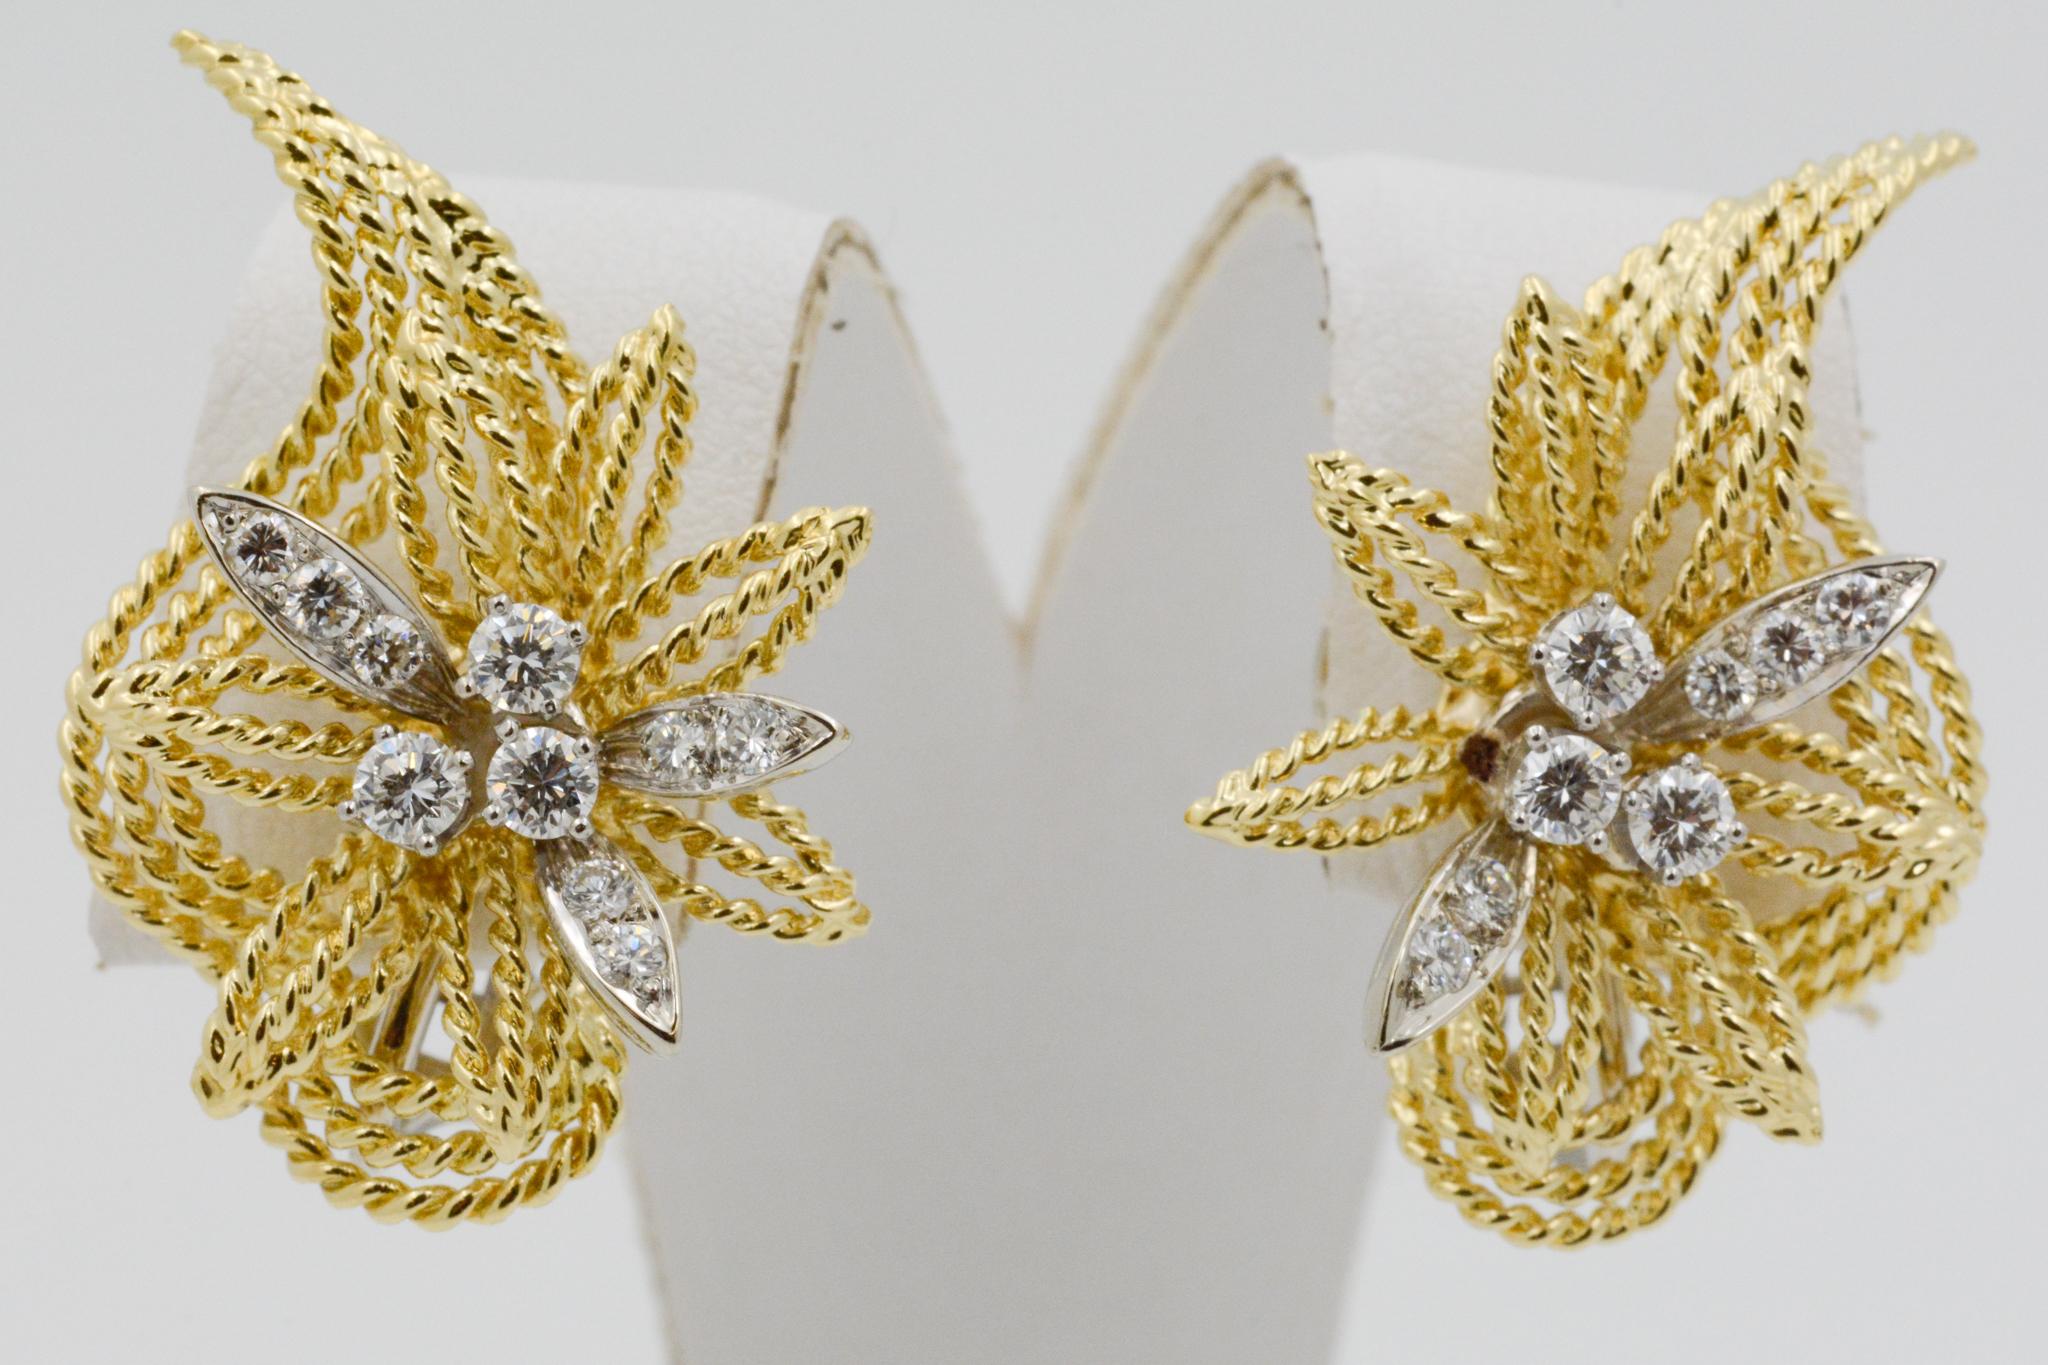 Exclusively from the Eiseman Estate Collection, these 18k yellow gold earrings have a textured floral leaf motif, featuring 16 round brilliant cut diamonds, weighing 1.00 carats GH SI. The earrings have clip backs. 